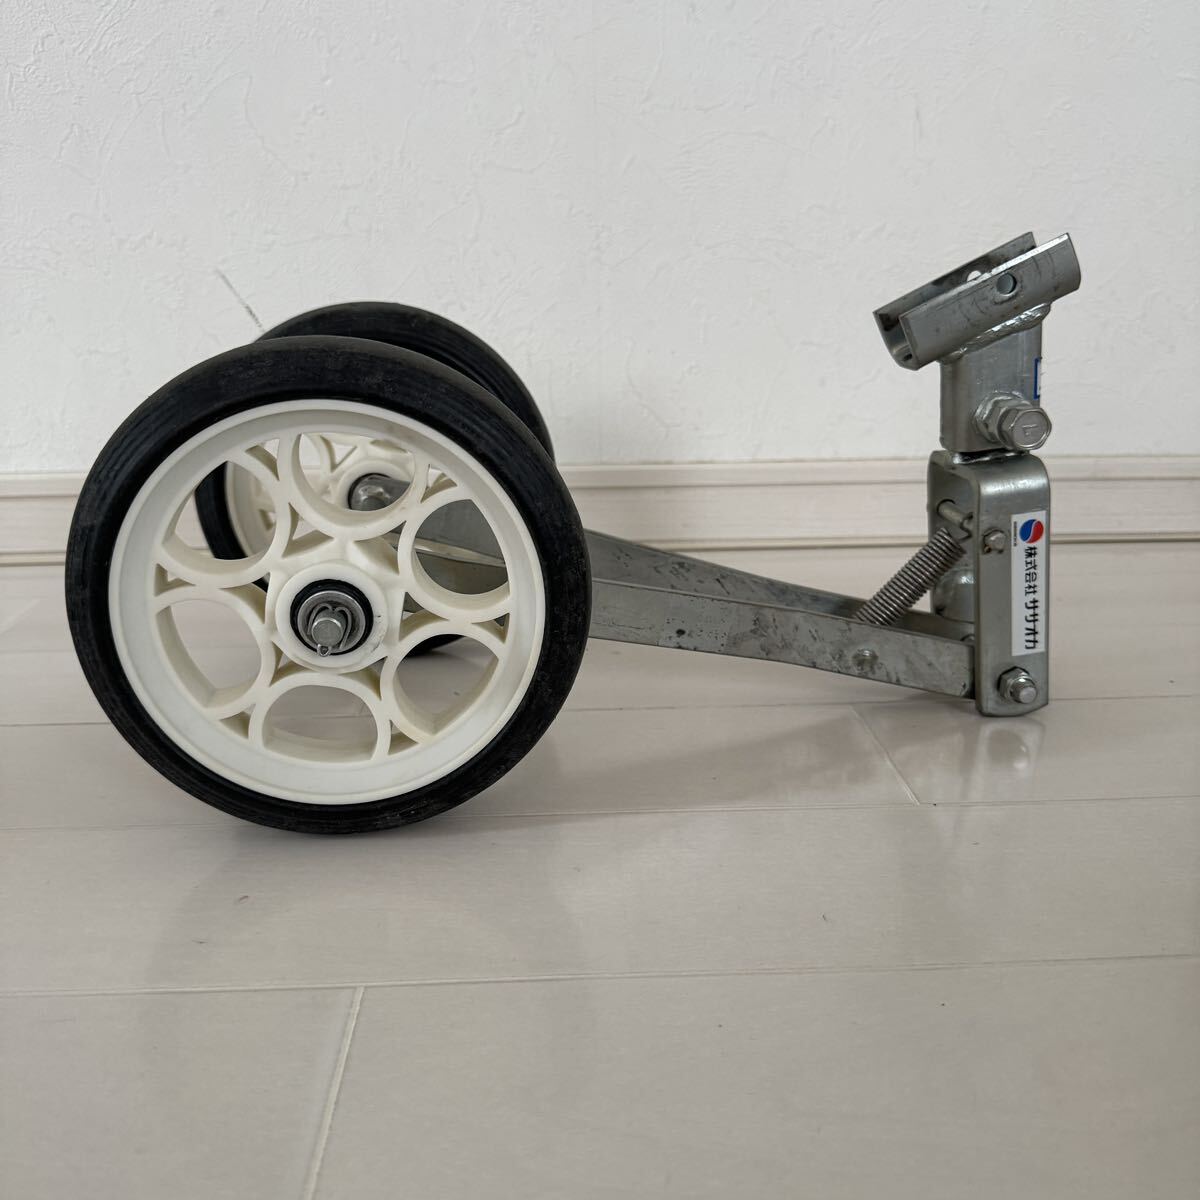  Honda cultivator F220,F220K1 for comfortably wheel 3 type (sasaoka product number 11539) [ Komame cultivator cultivator Attachment ]